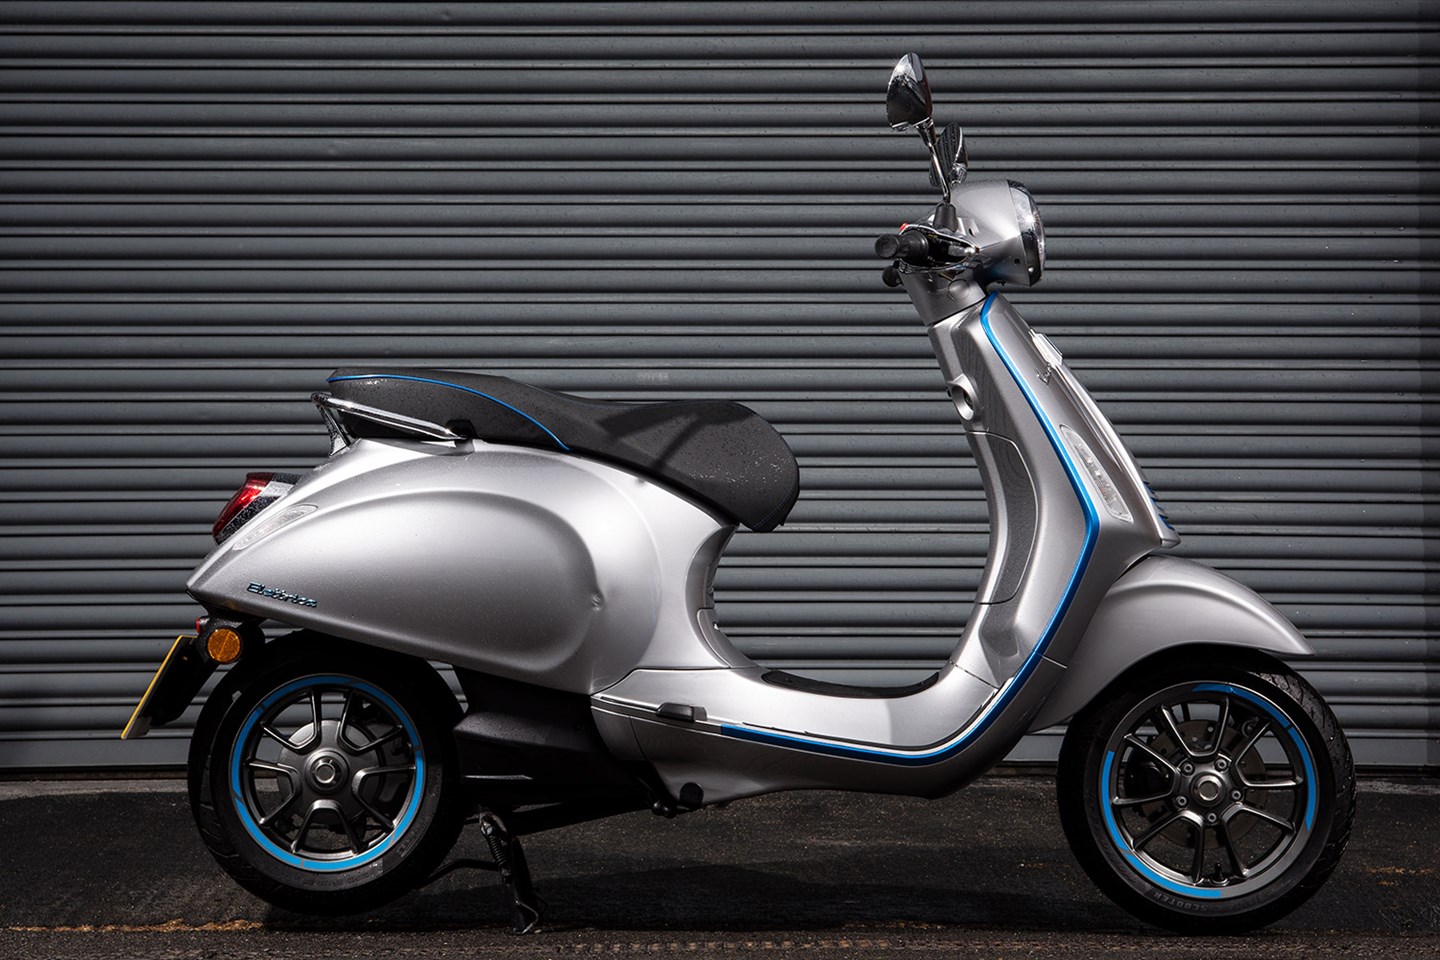 Annihilate New meaning Comparable Piaggio Vespa Elettrica (2019 - on) Electric Scooter Review | MCN